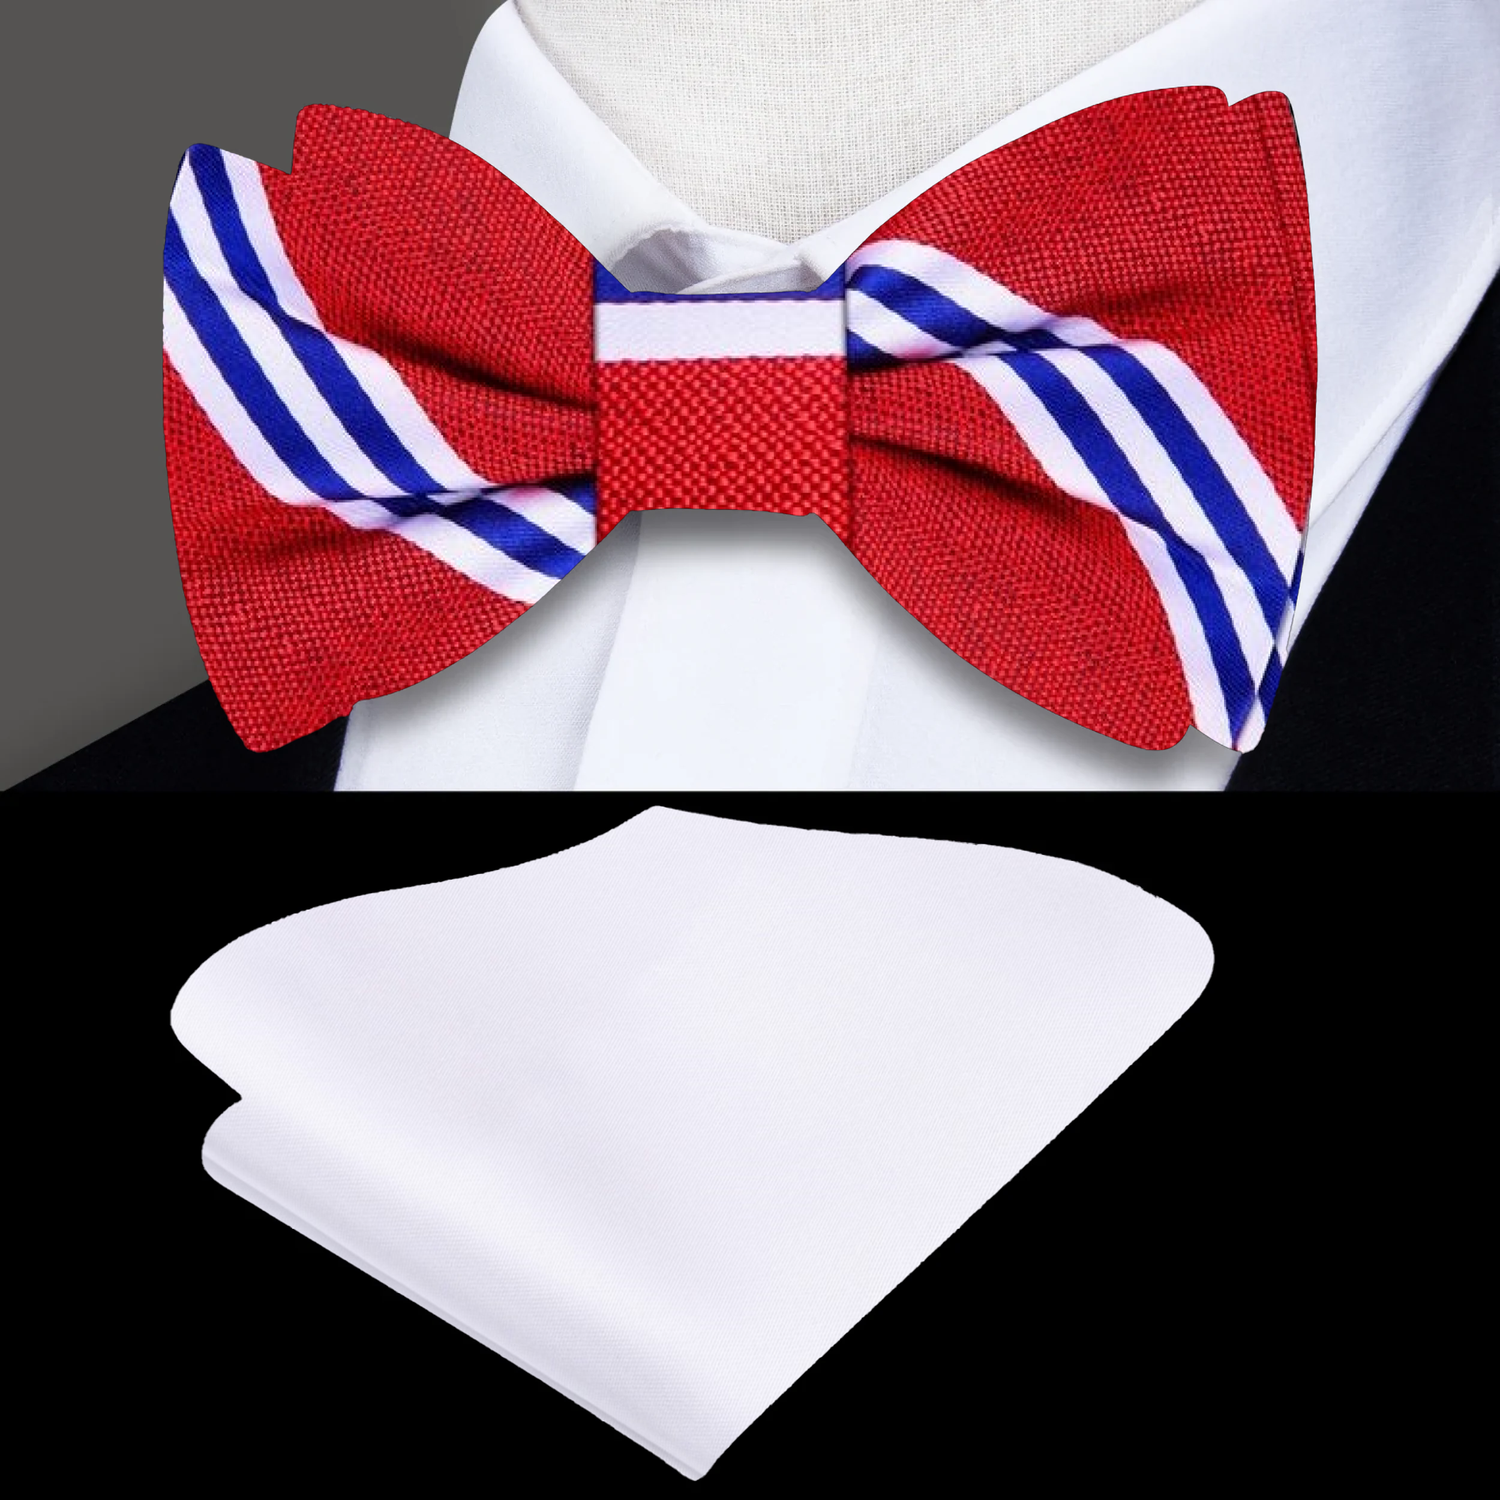 Coach PRIME Deion Sanders Red White and Blue Stripe Bow Tie and Square